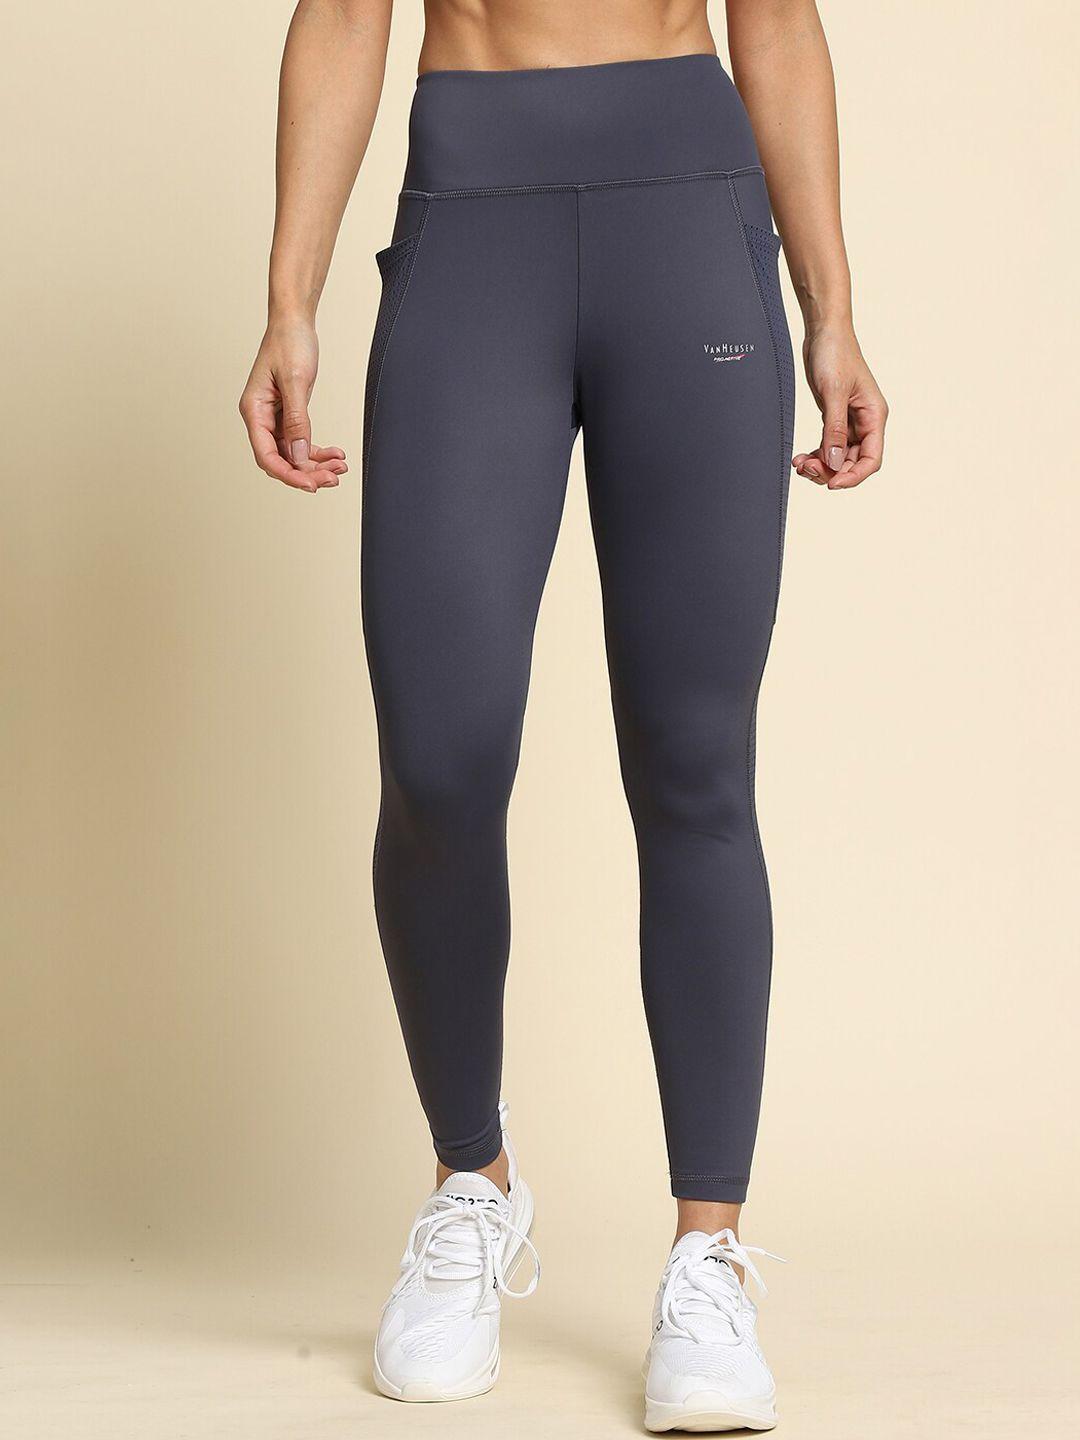 van-heusen-women-ankle-length-anti-bacterial-high-stretch-sports-tights